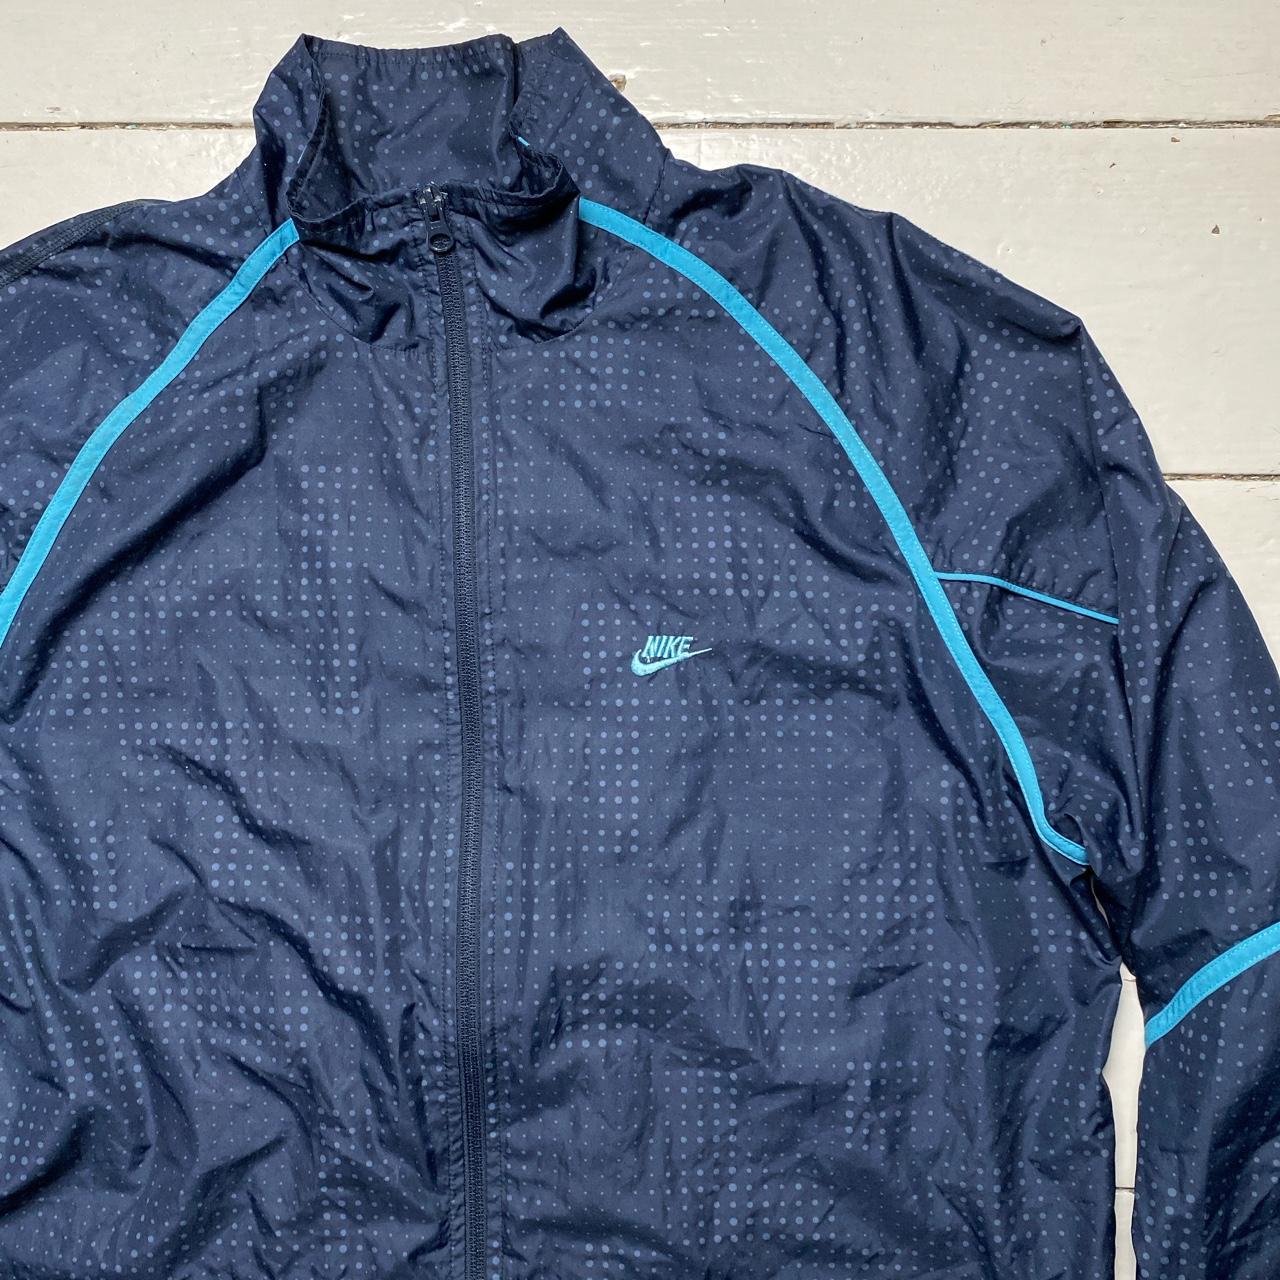 Nike Air Vintage Shell Jacket Navy and Light Blue